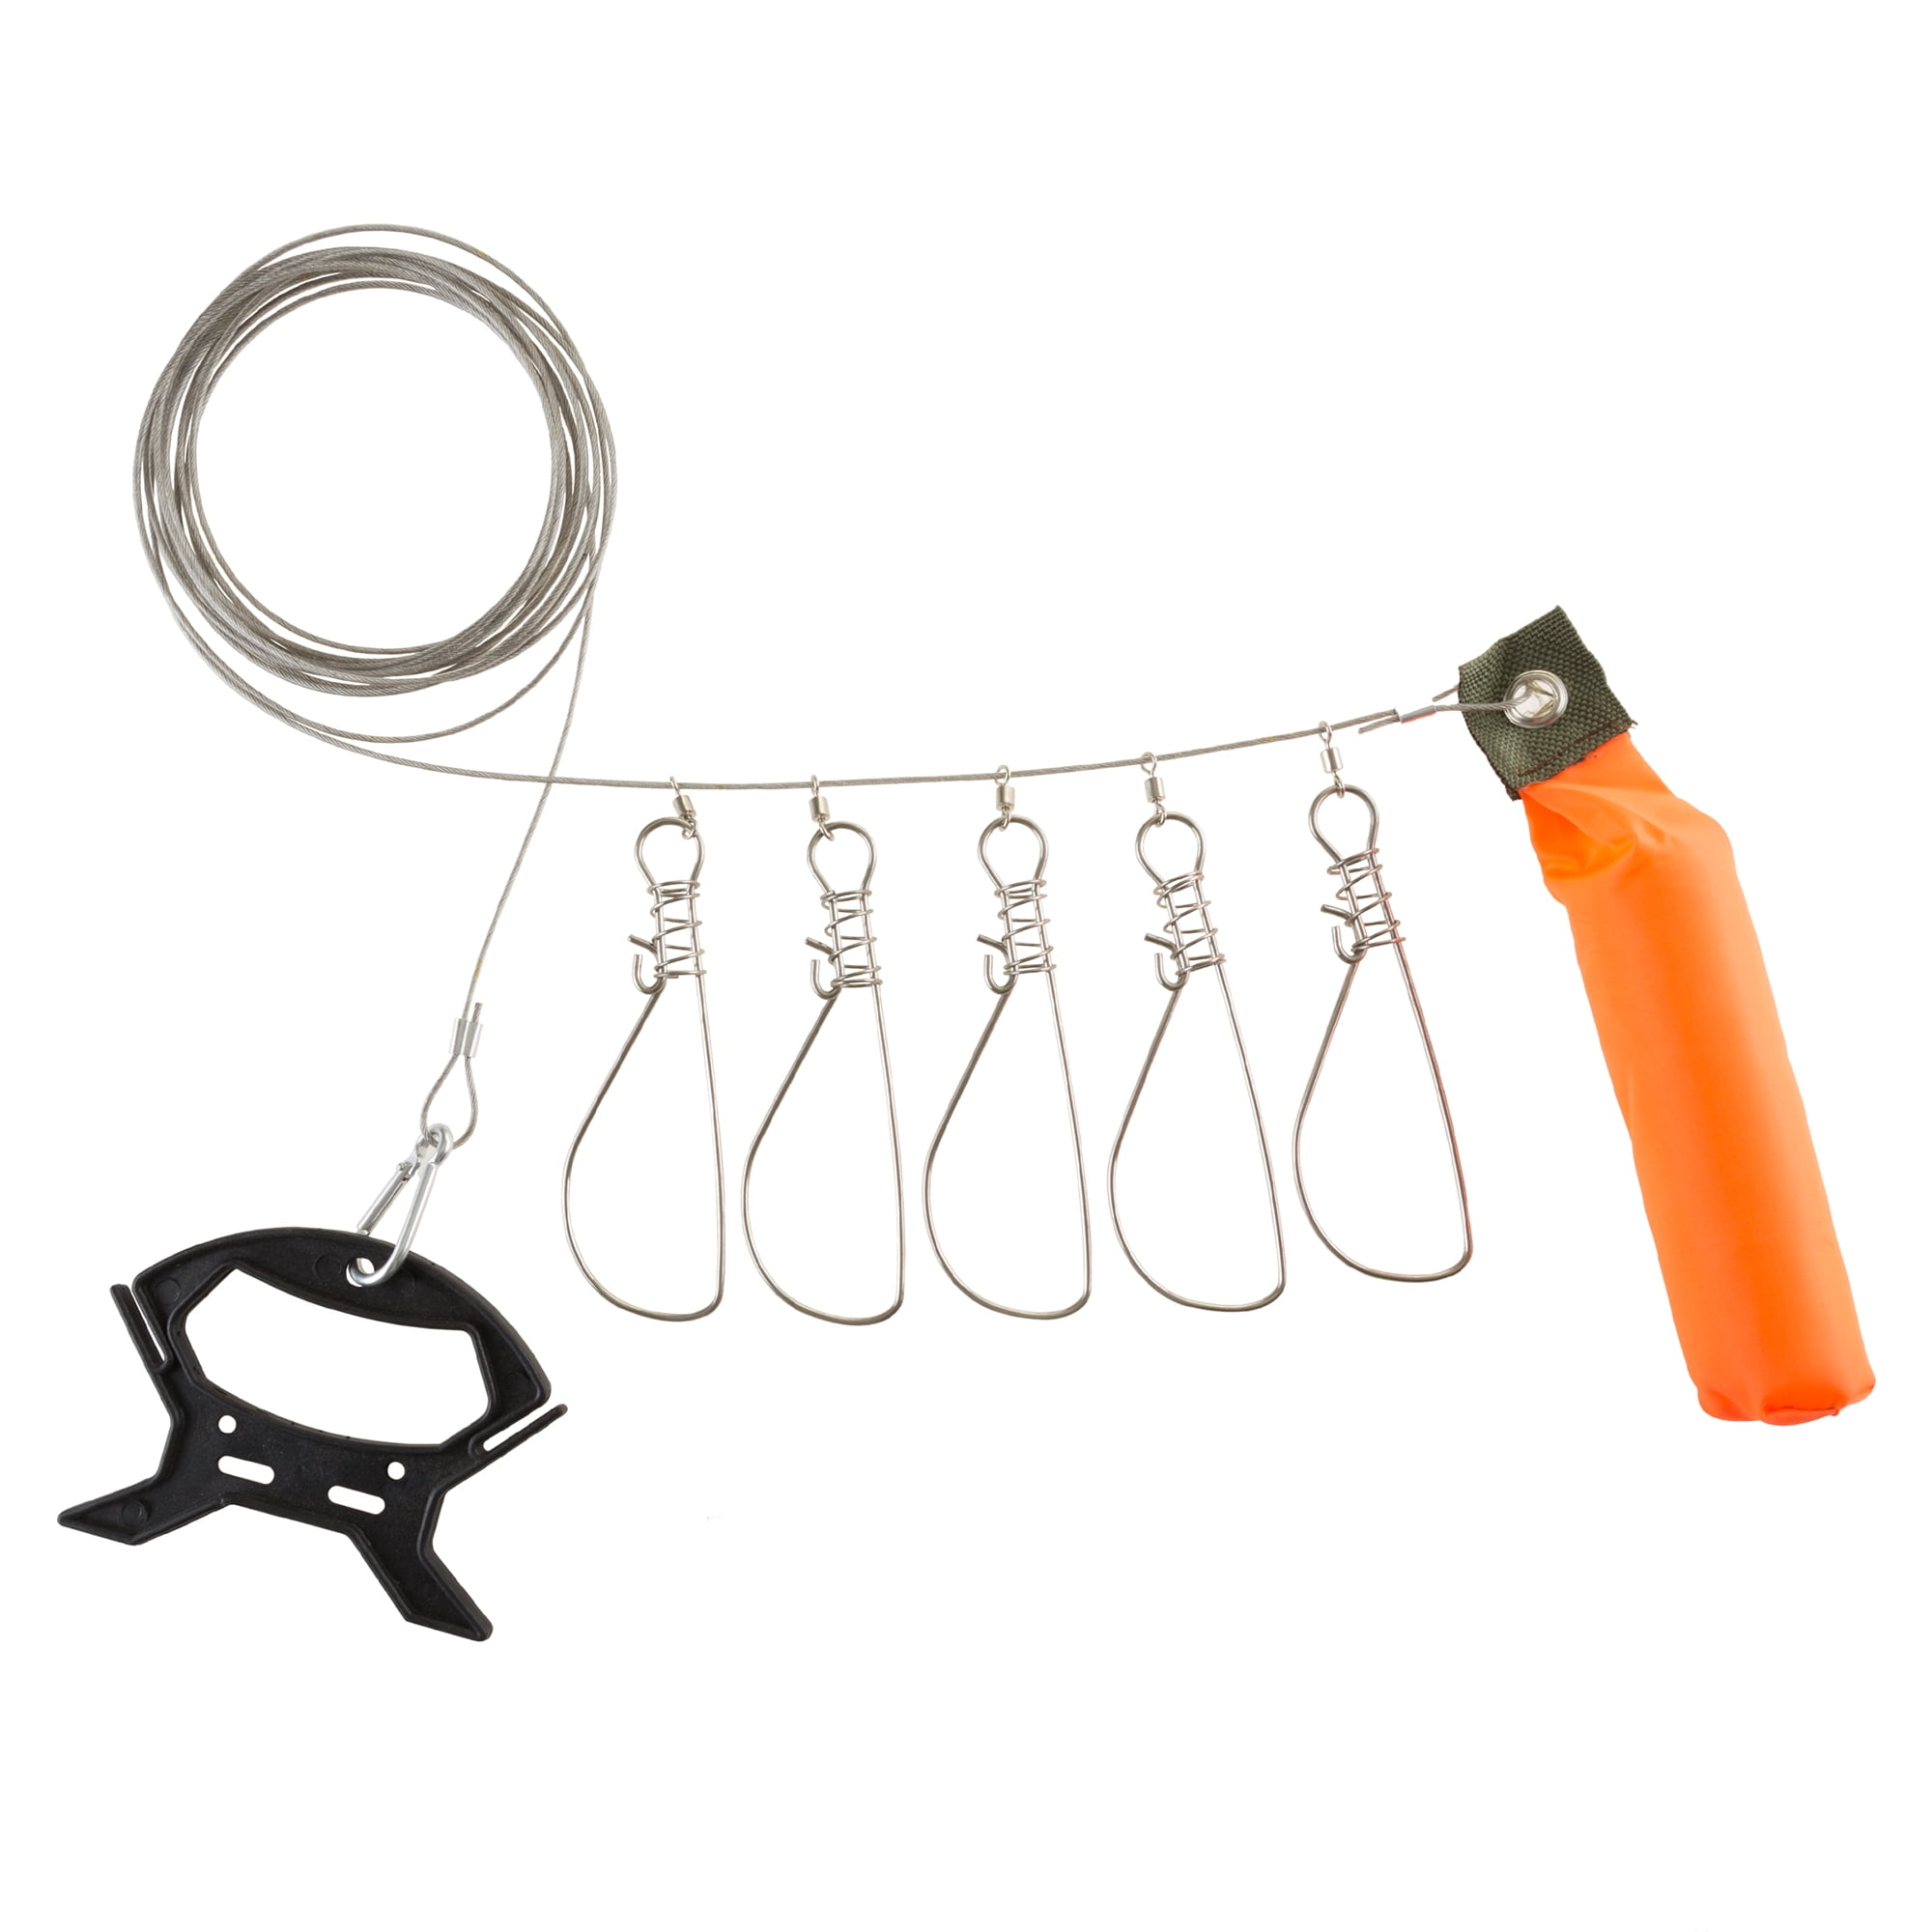 Fish Stringer- Heavy Duty Rope Stringer for Fishing with 5 Stainless Steel,  Tangle Free Hooks, Float and Plastic Handle By Wakeman Outdoors (16Â'4Â”) 